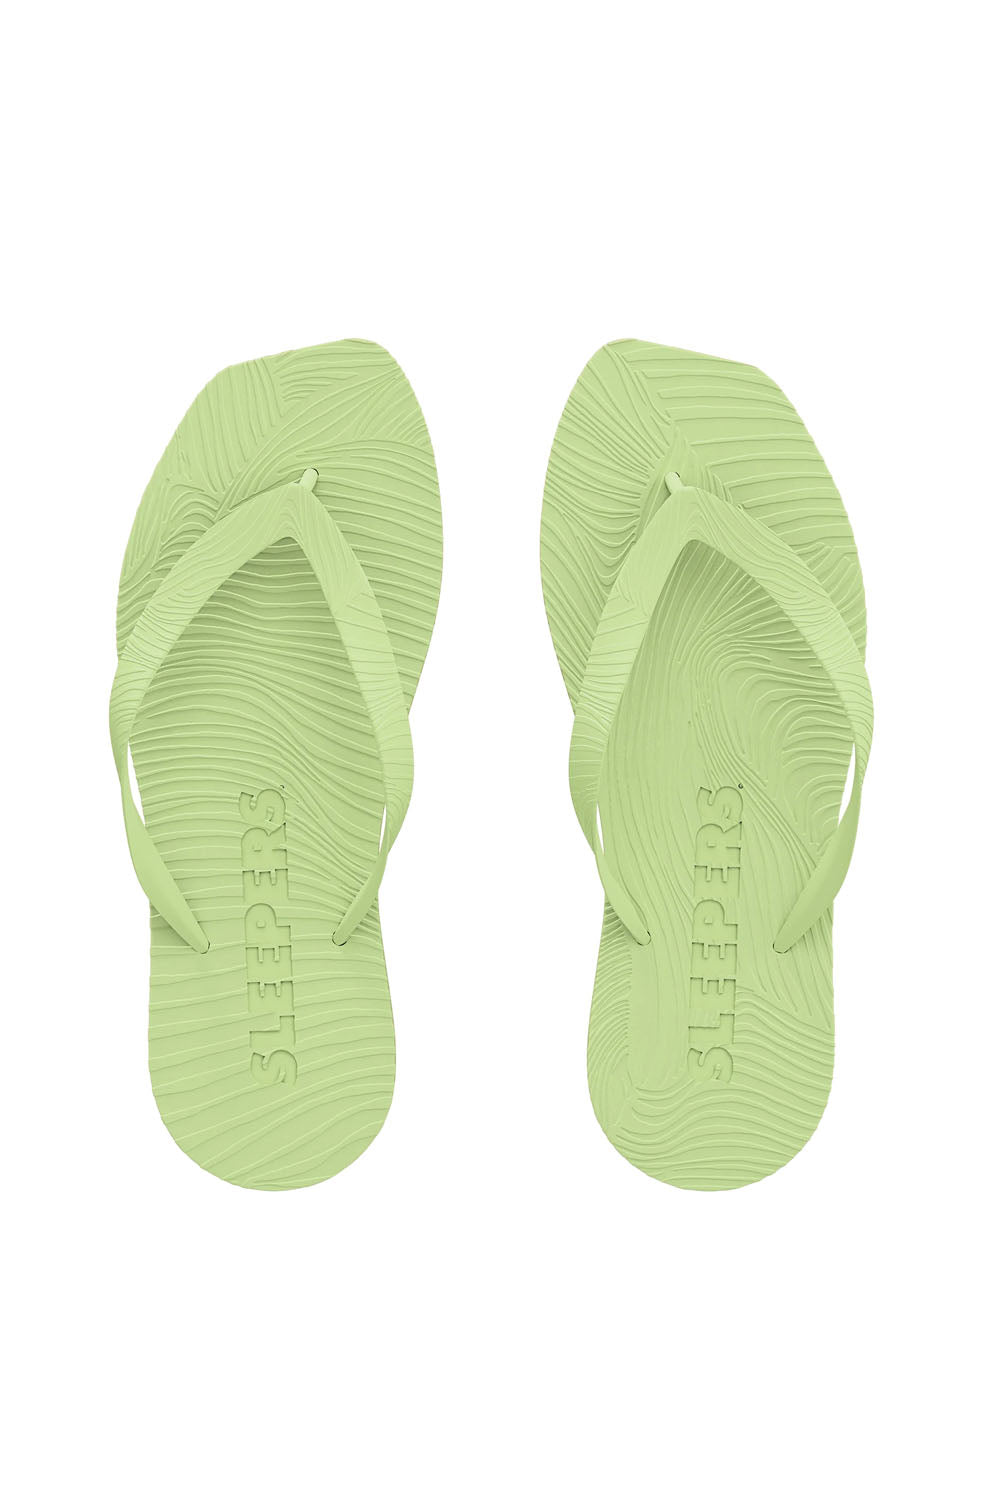 Sleepers Tapered Sap Green Flip Flop